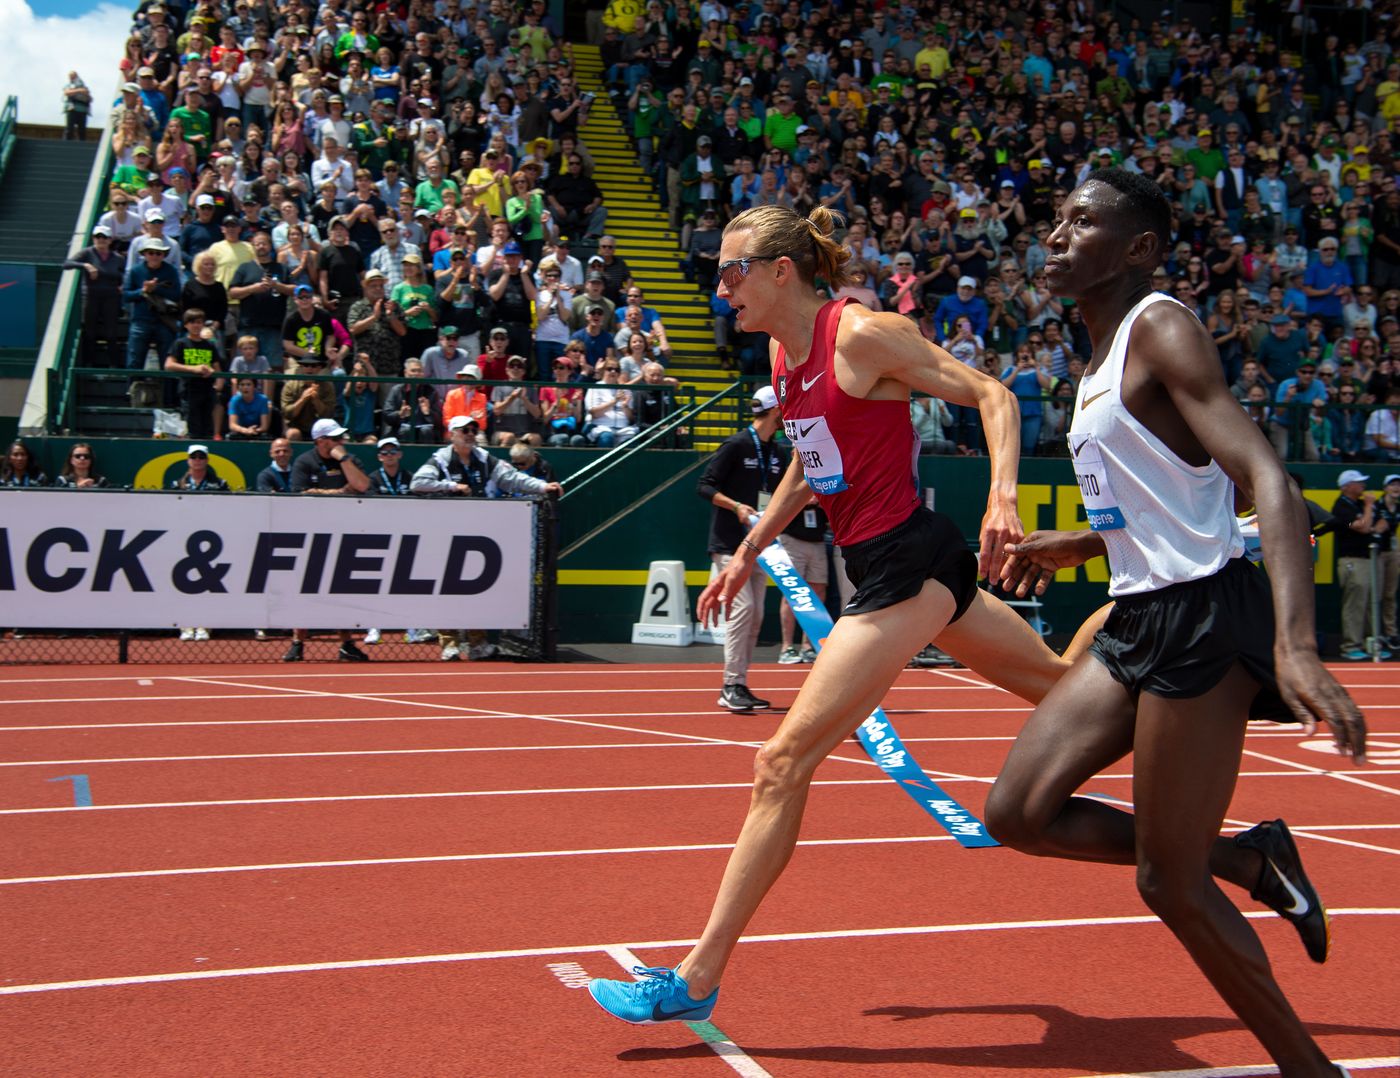 jager steeplem finish 2018  pre classic day 2451  jeff cohen photo  .jpg